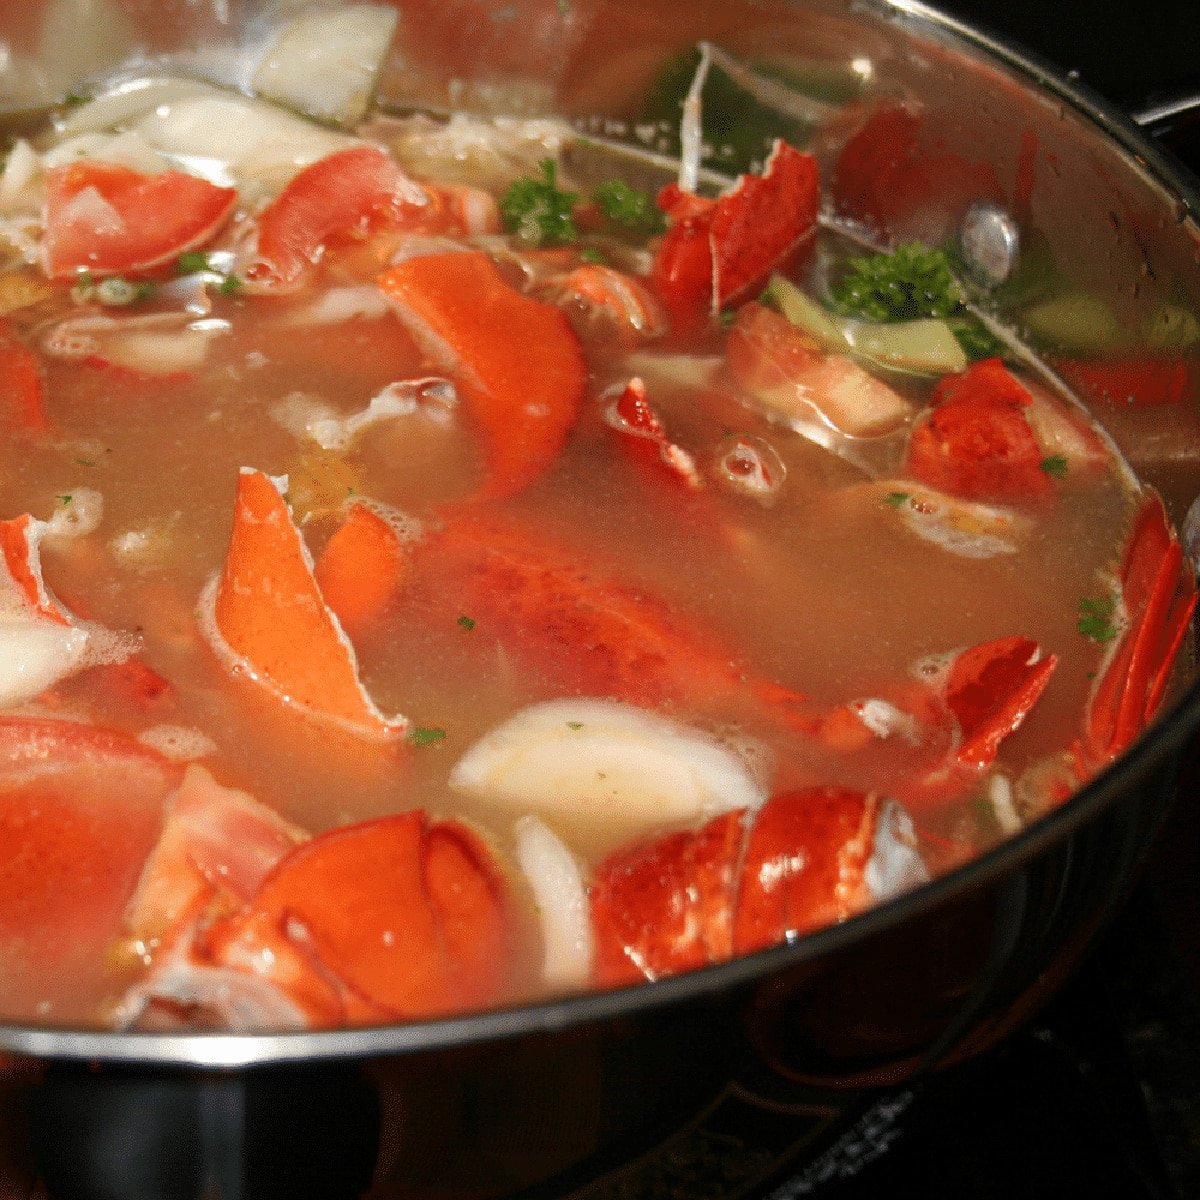 Rich Lobster Stock: An Easy & Delicious Homemade Recipe